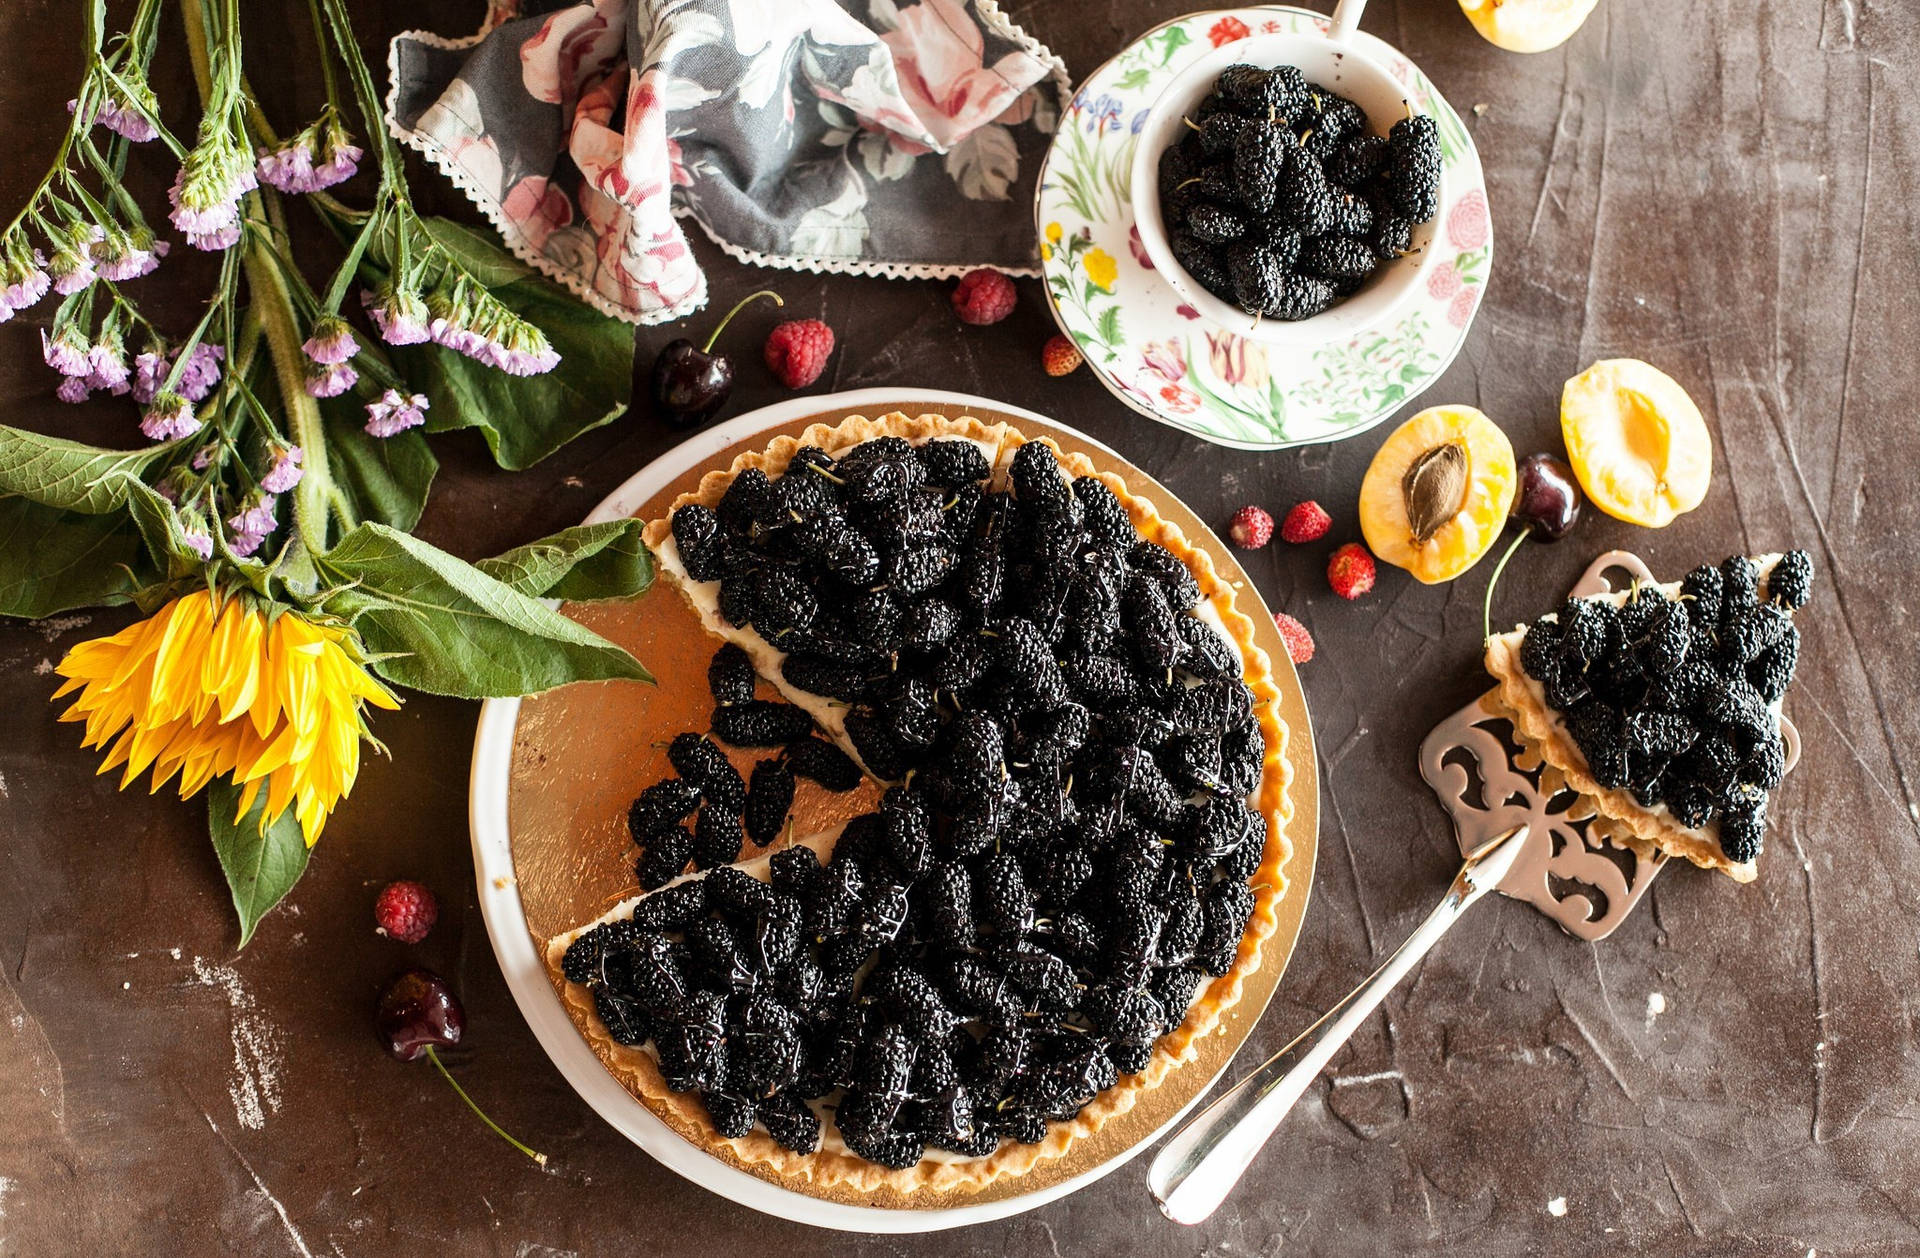 A Mouth Watering, Fresh Blackberry Pie